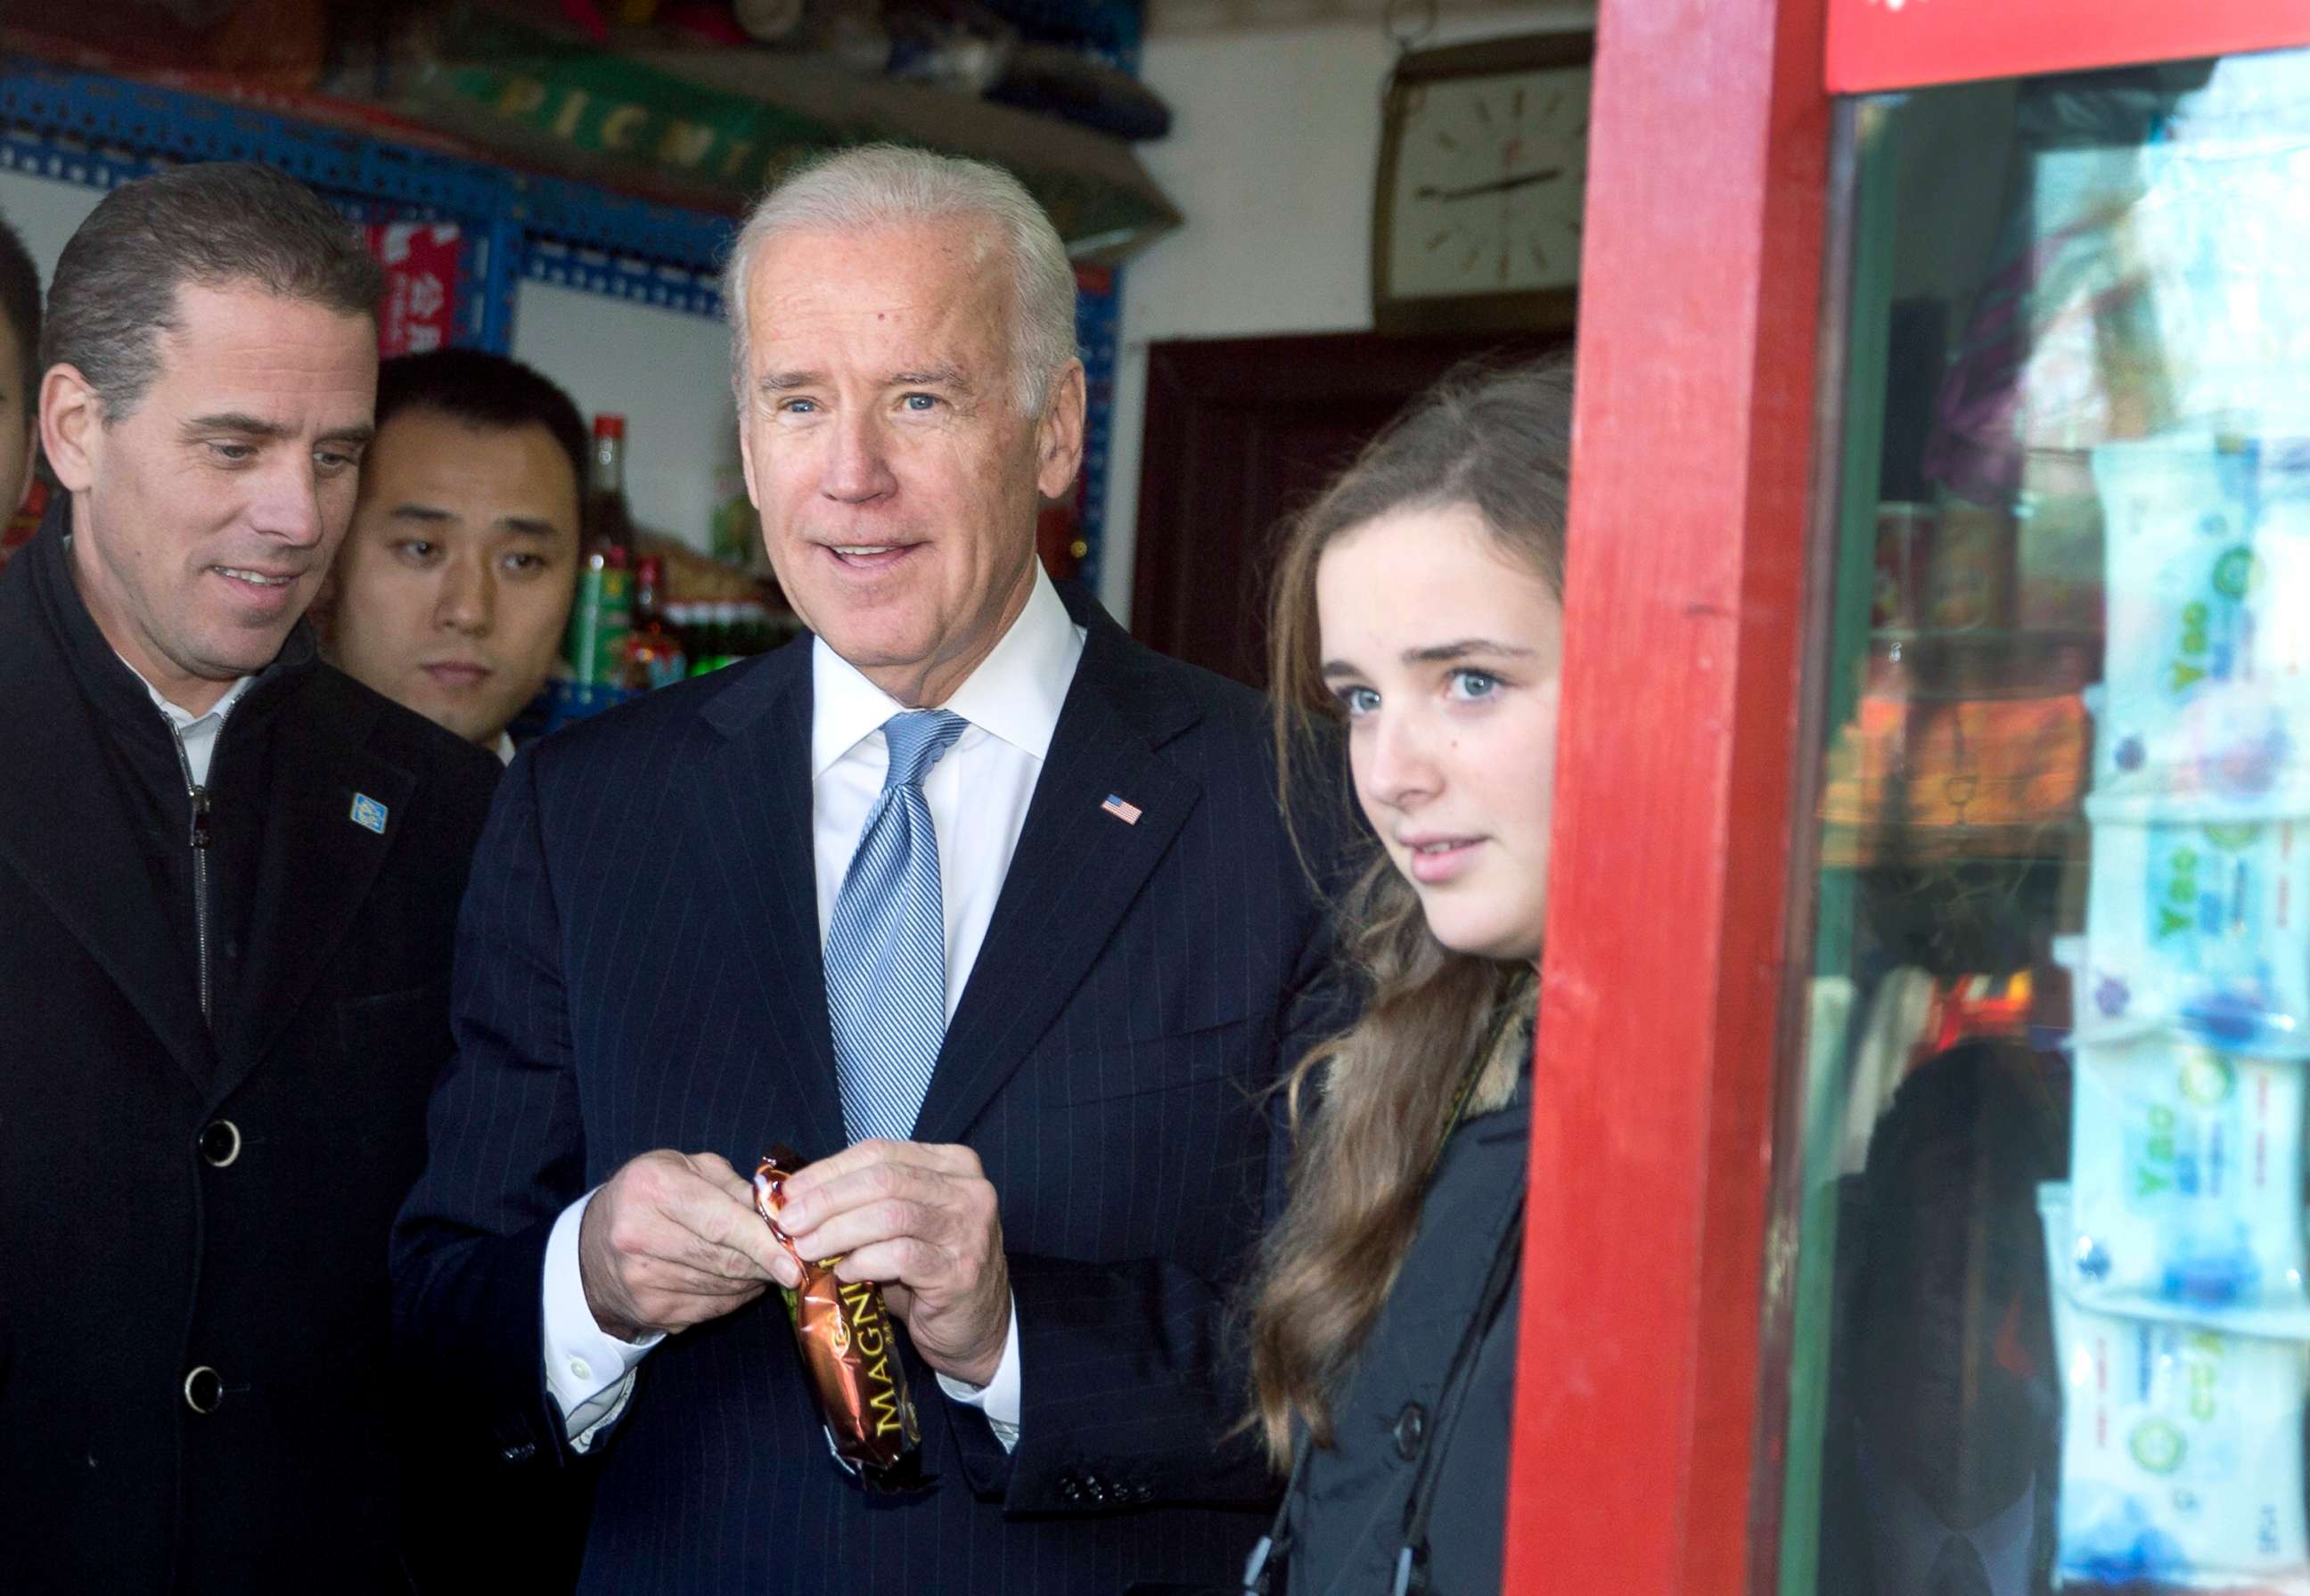 PHOTO: Vice President Joe Biden, center, buys an ice-cream at a shop as he tours a Hutong alley with his granddaughter Finnegan Biden, right, and son Hunter Biden, left, in Beijing, China, Dec. 5, 2013.